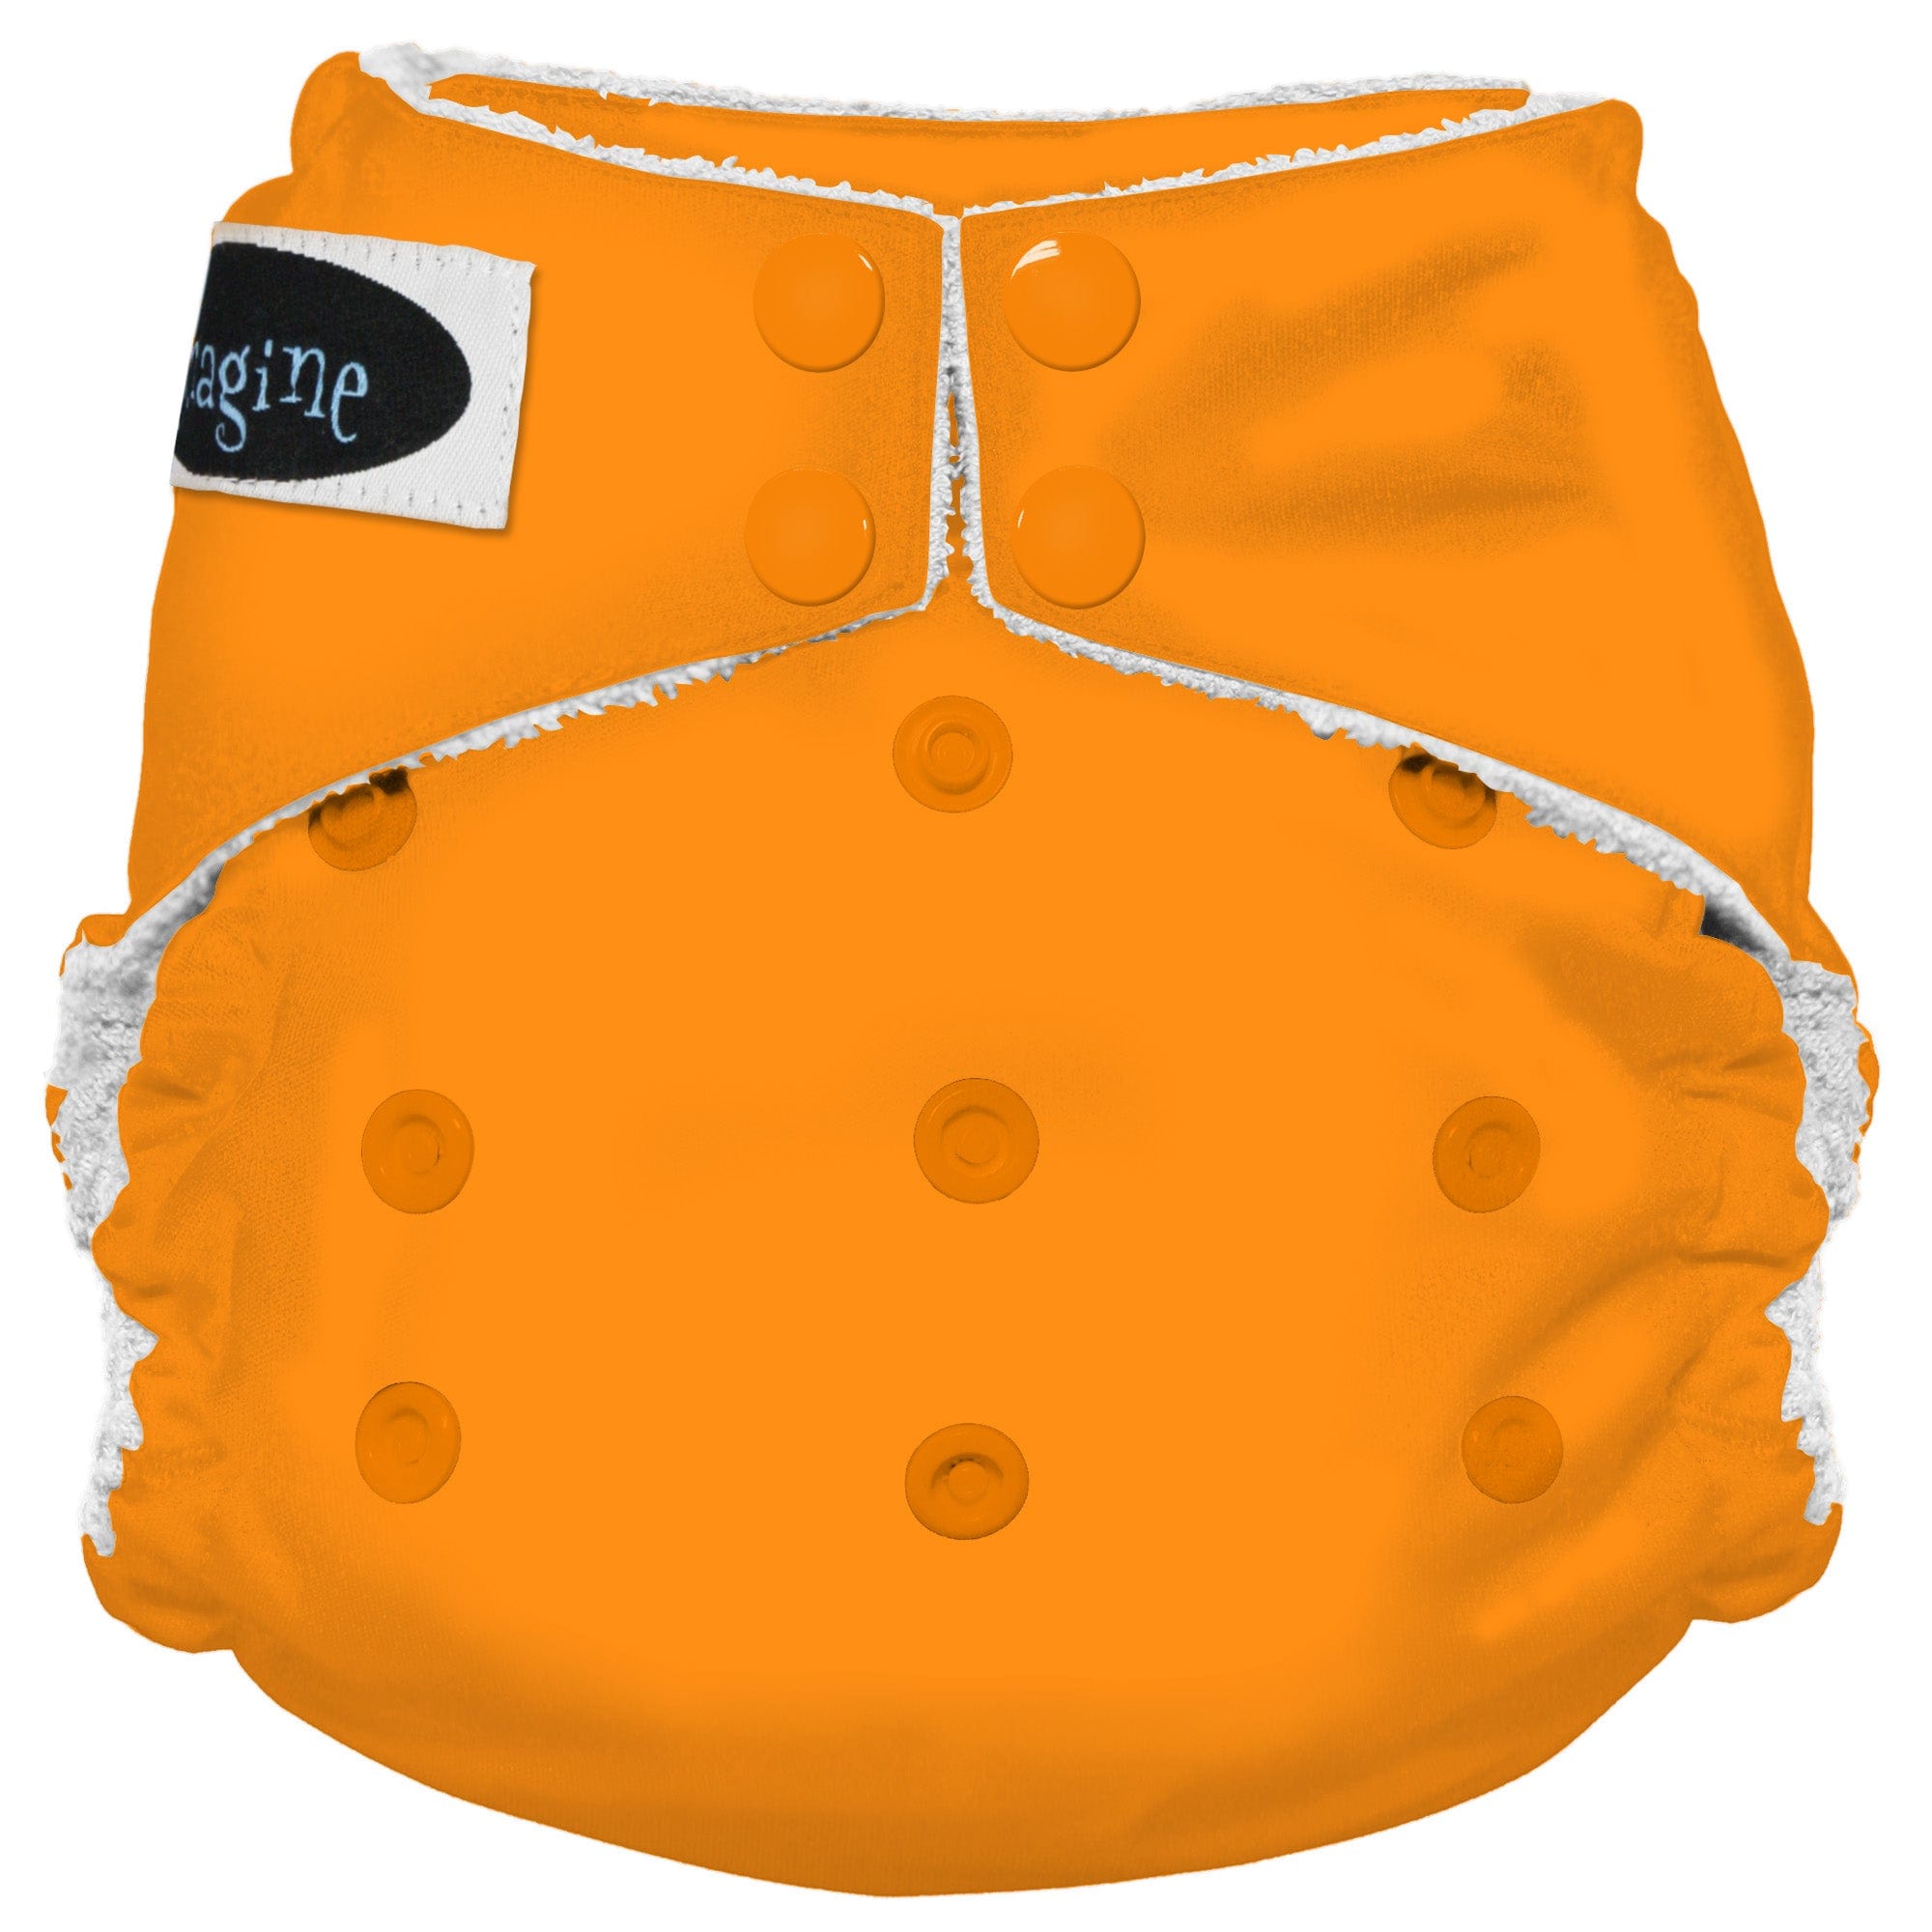 Pack of 1 Reusable Cloth Diapers with Fleece, One Size Baby Diapers